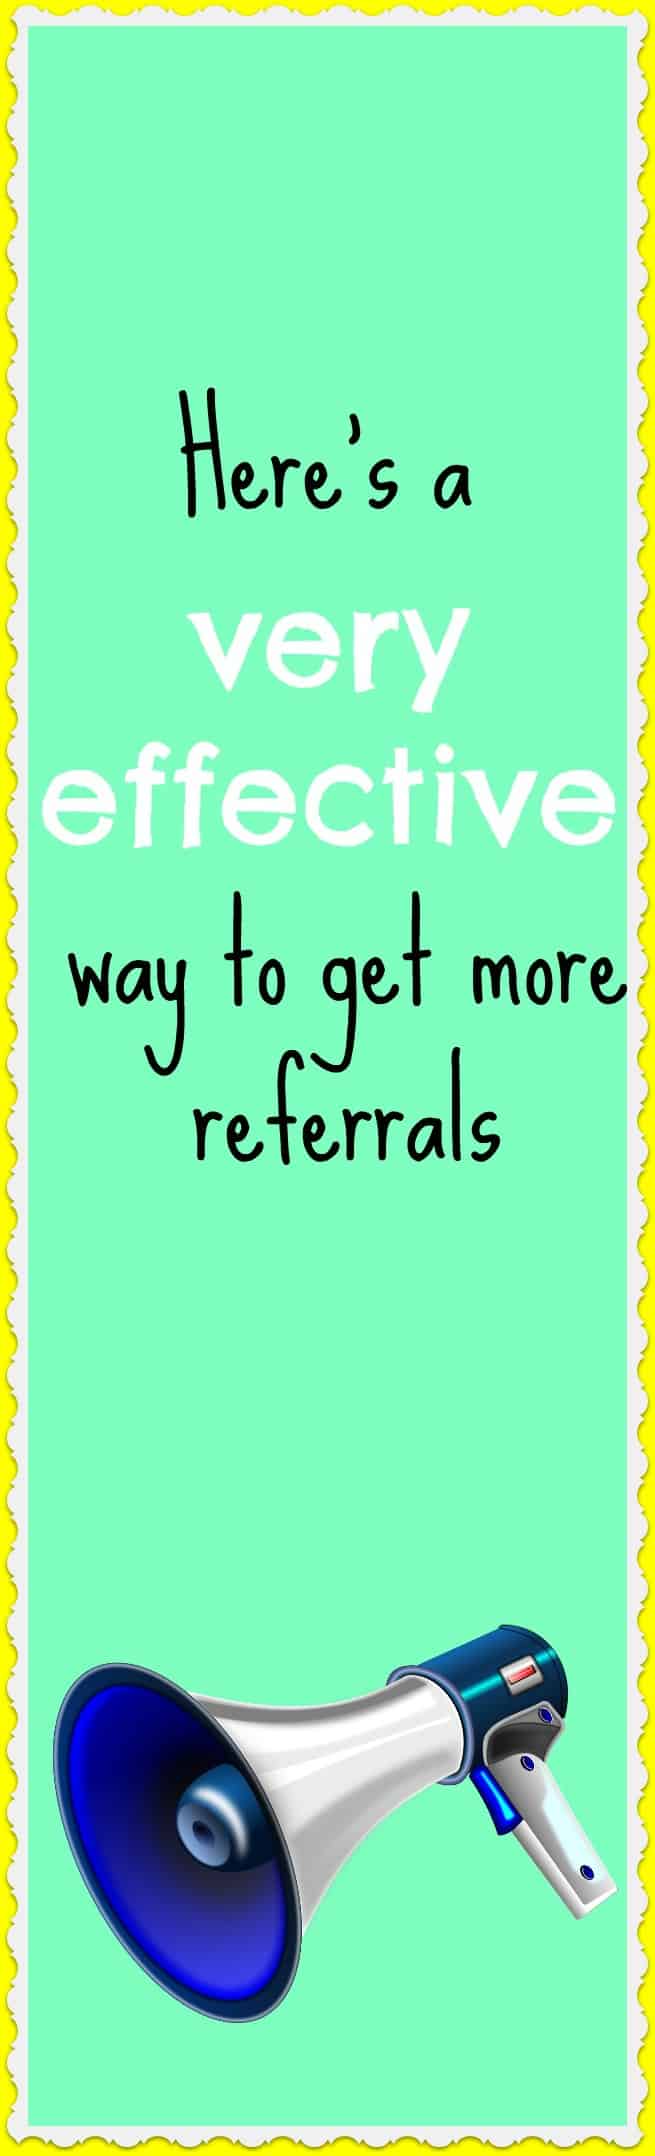 Here's a very effective way to get more referrals for your Shopify store, real estate business, or any type of business, really!